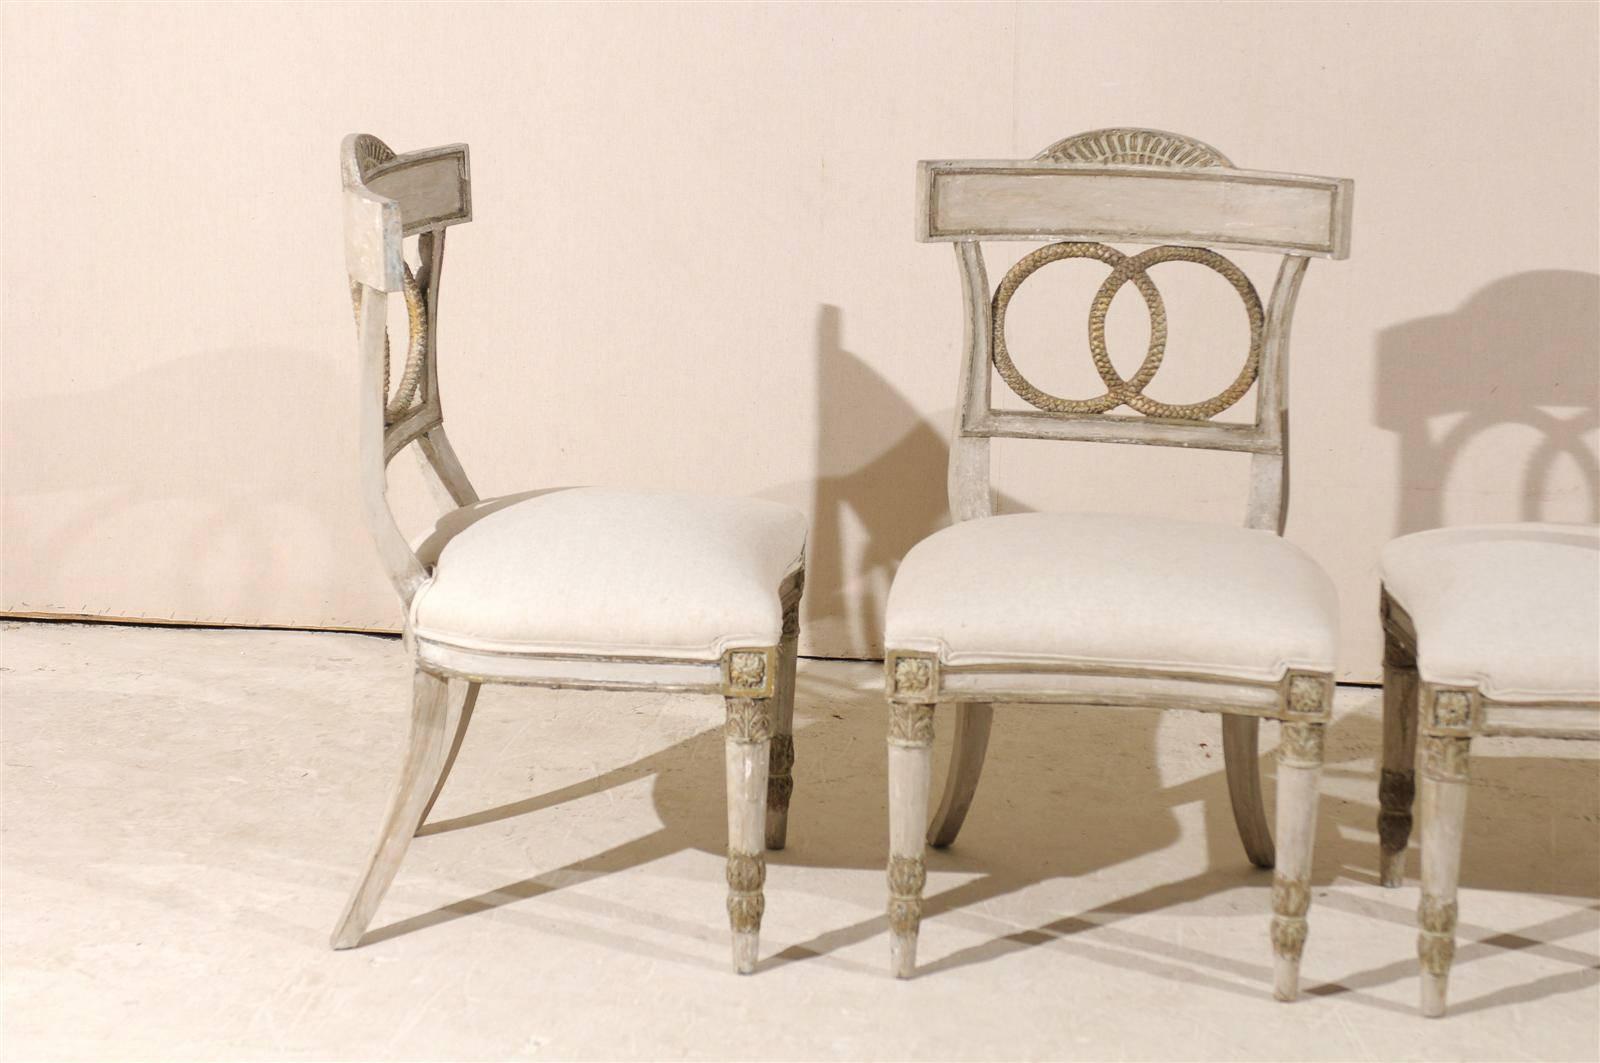 Upholstery Set of Four European Painted Wood Chairs